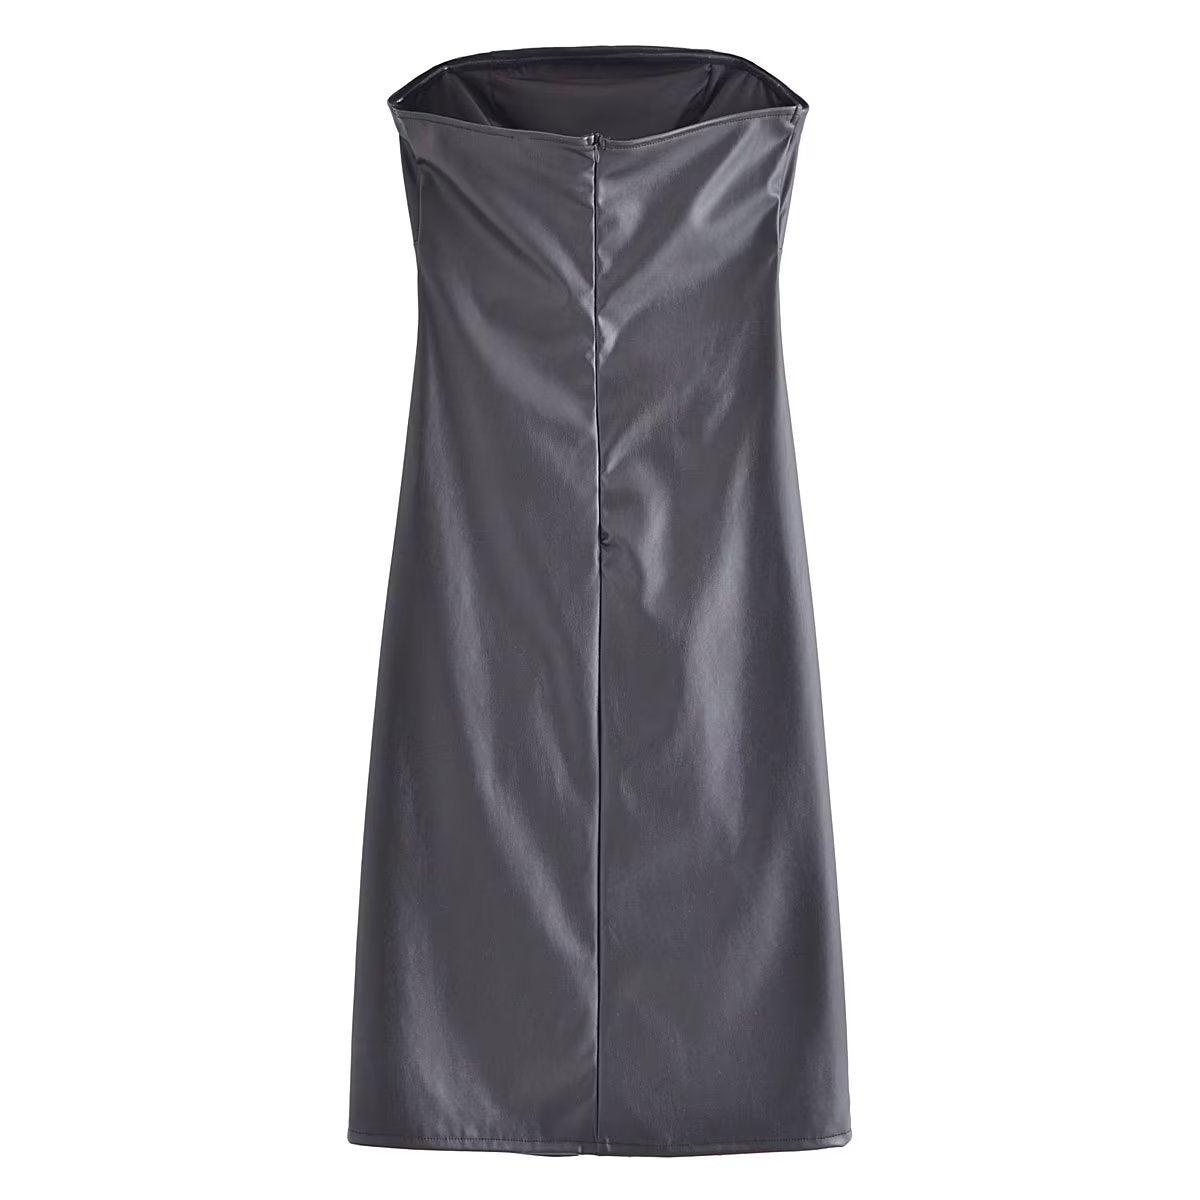 High Split Strapless Ruffle Dress: Summer Elegance with a Sexy Twist - ForVanity dress, leather, Leather Dress Leather Dress